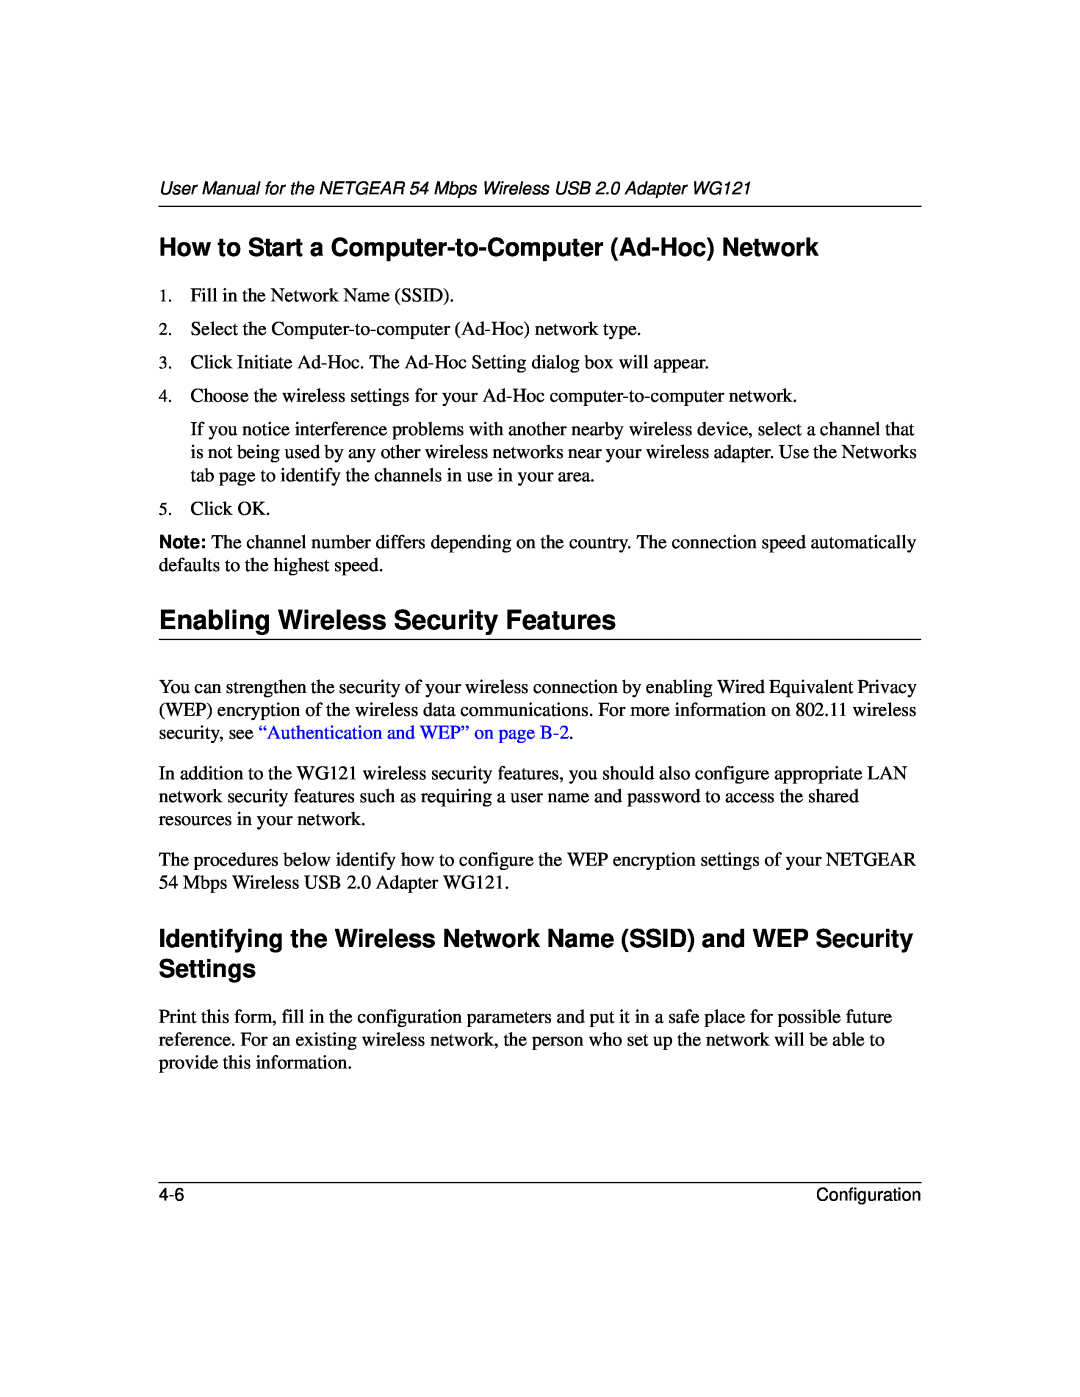 NETGEAR WG121 user manual Enabling Wireless Security Features, How to Start a Computer-to-Computer Ad-Hoc Network 